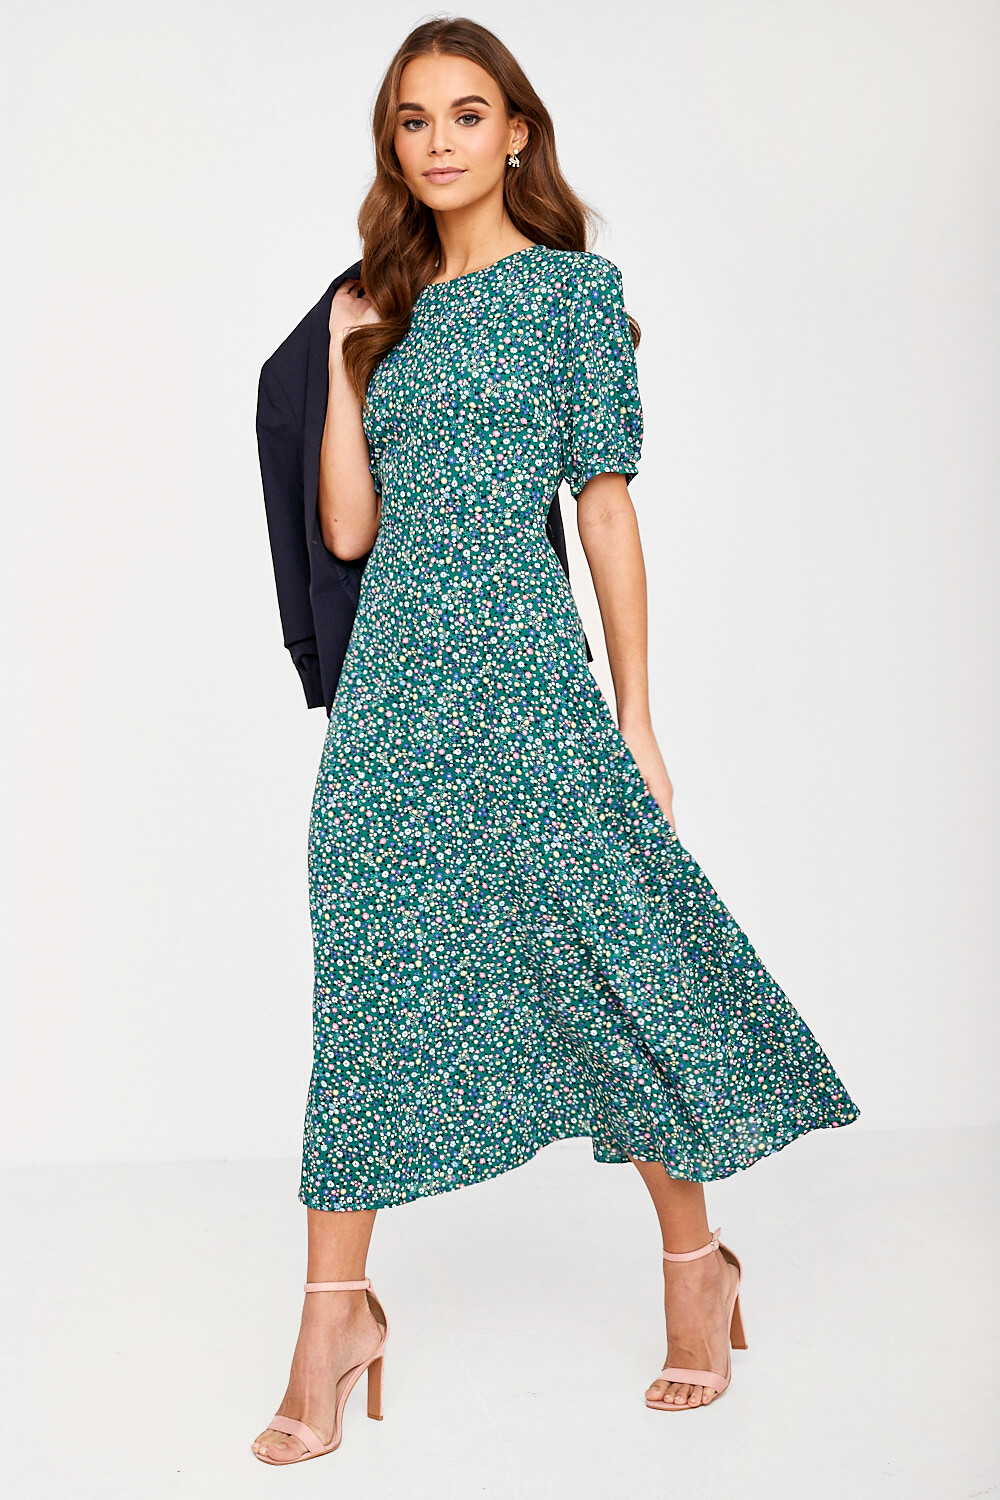 Marc Angelo Ditsy Floral Midi Dress in Green | iCLOTHING - iCLOTHING